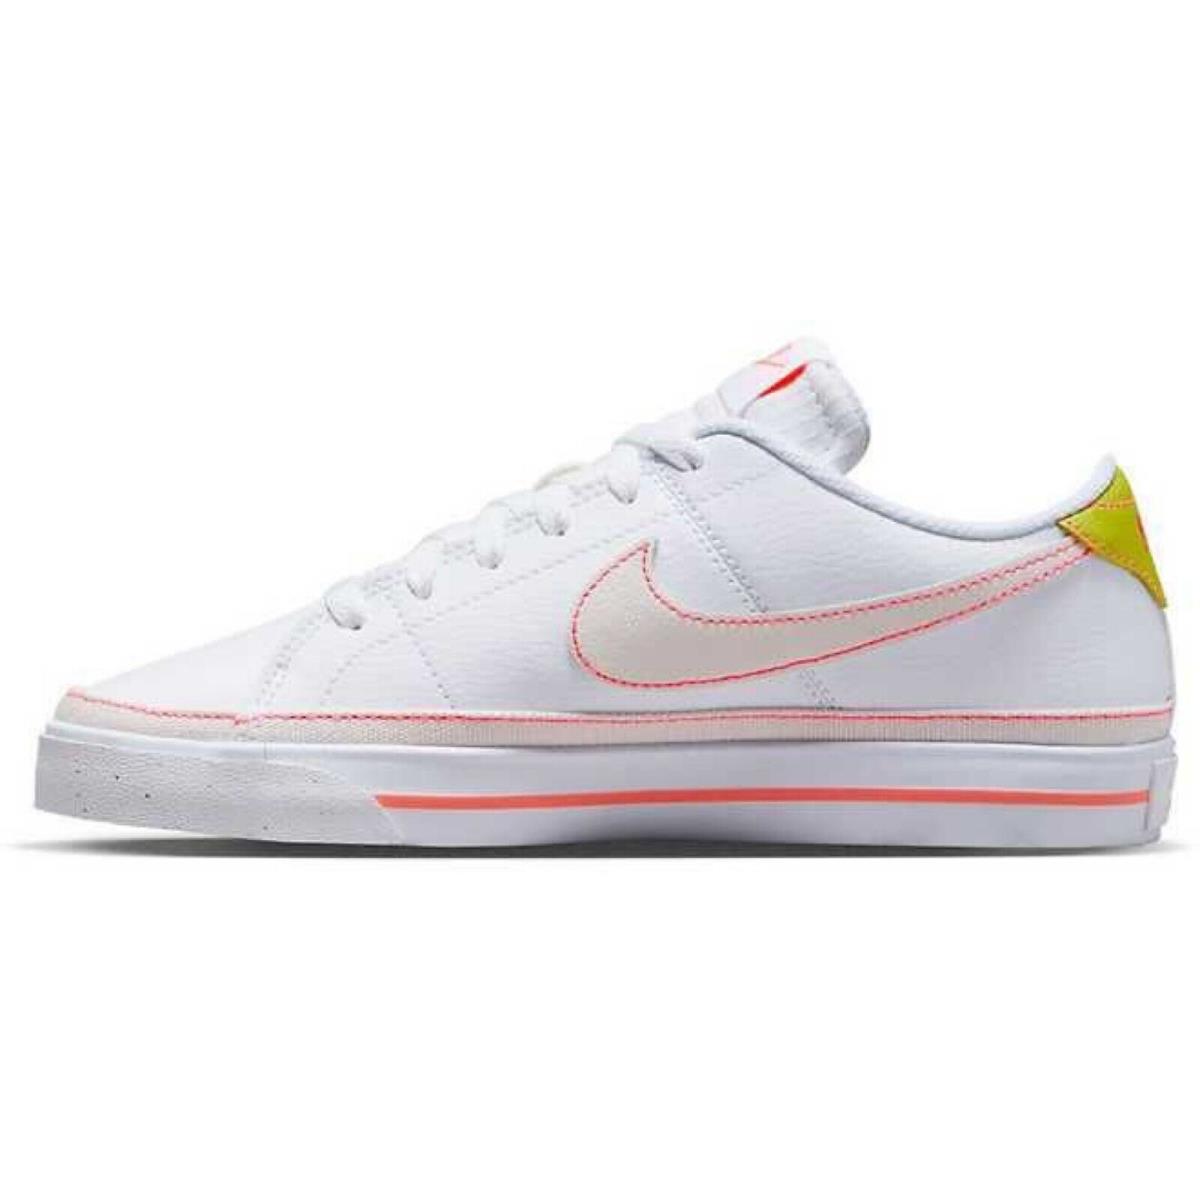 Nike shoes Court Legacy - White , White/Pink Punch/Green Cactus Manufacturer 13